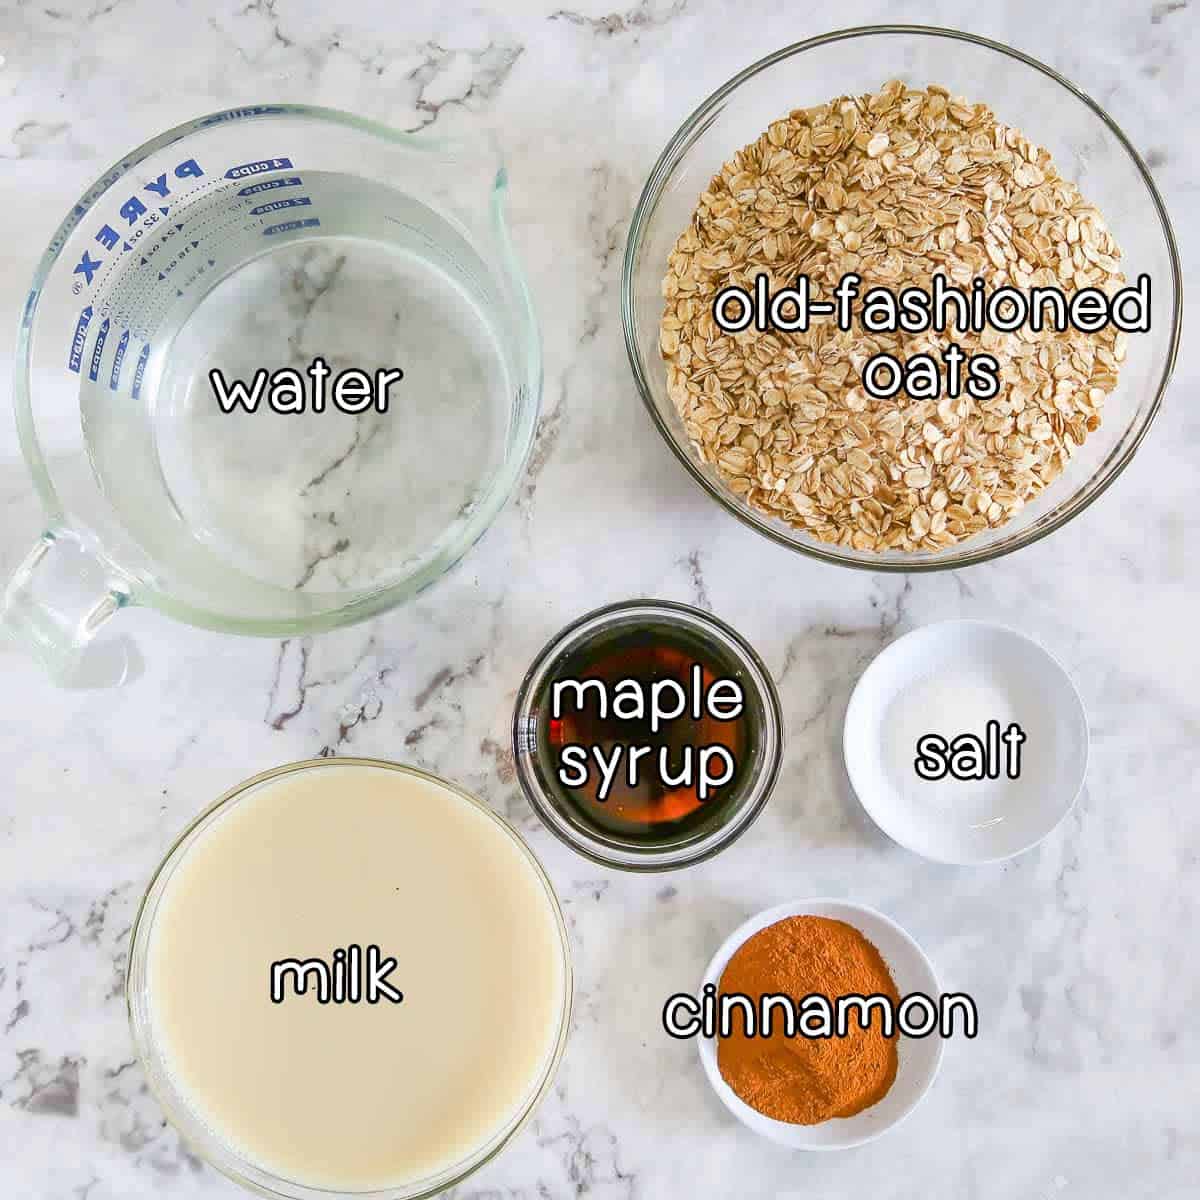 Overhead shot of ingredients - water, old fashioned oats, maple syrup, milk, cinnamon, and salt.